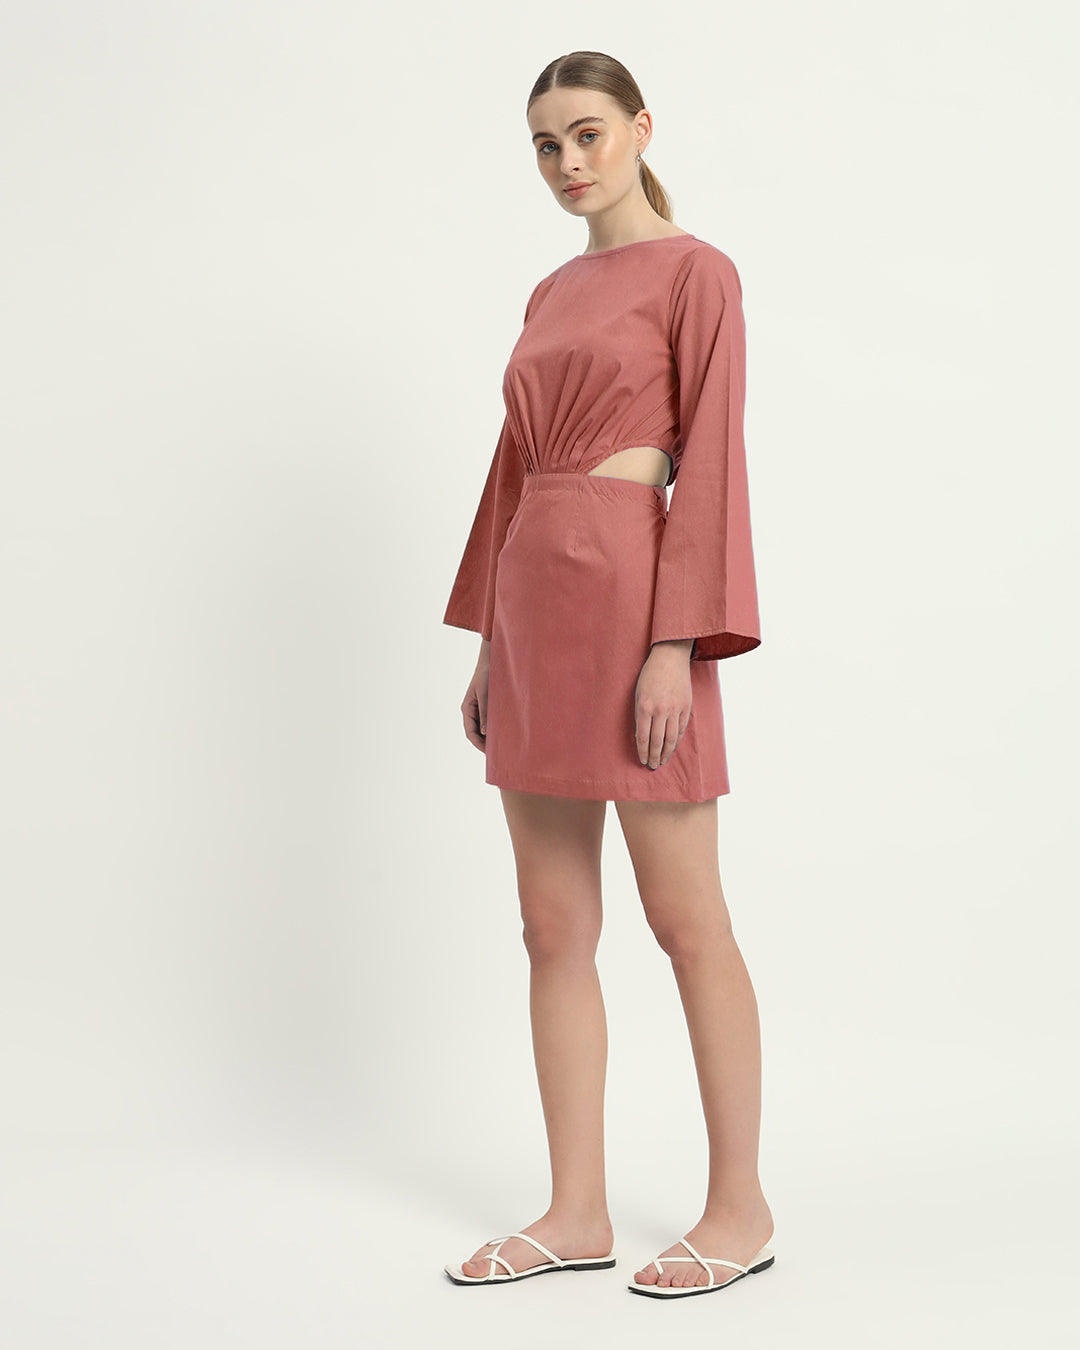 The Eloy  Ivory Pink Cotton Dress